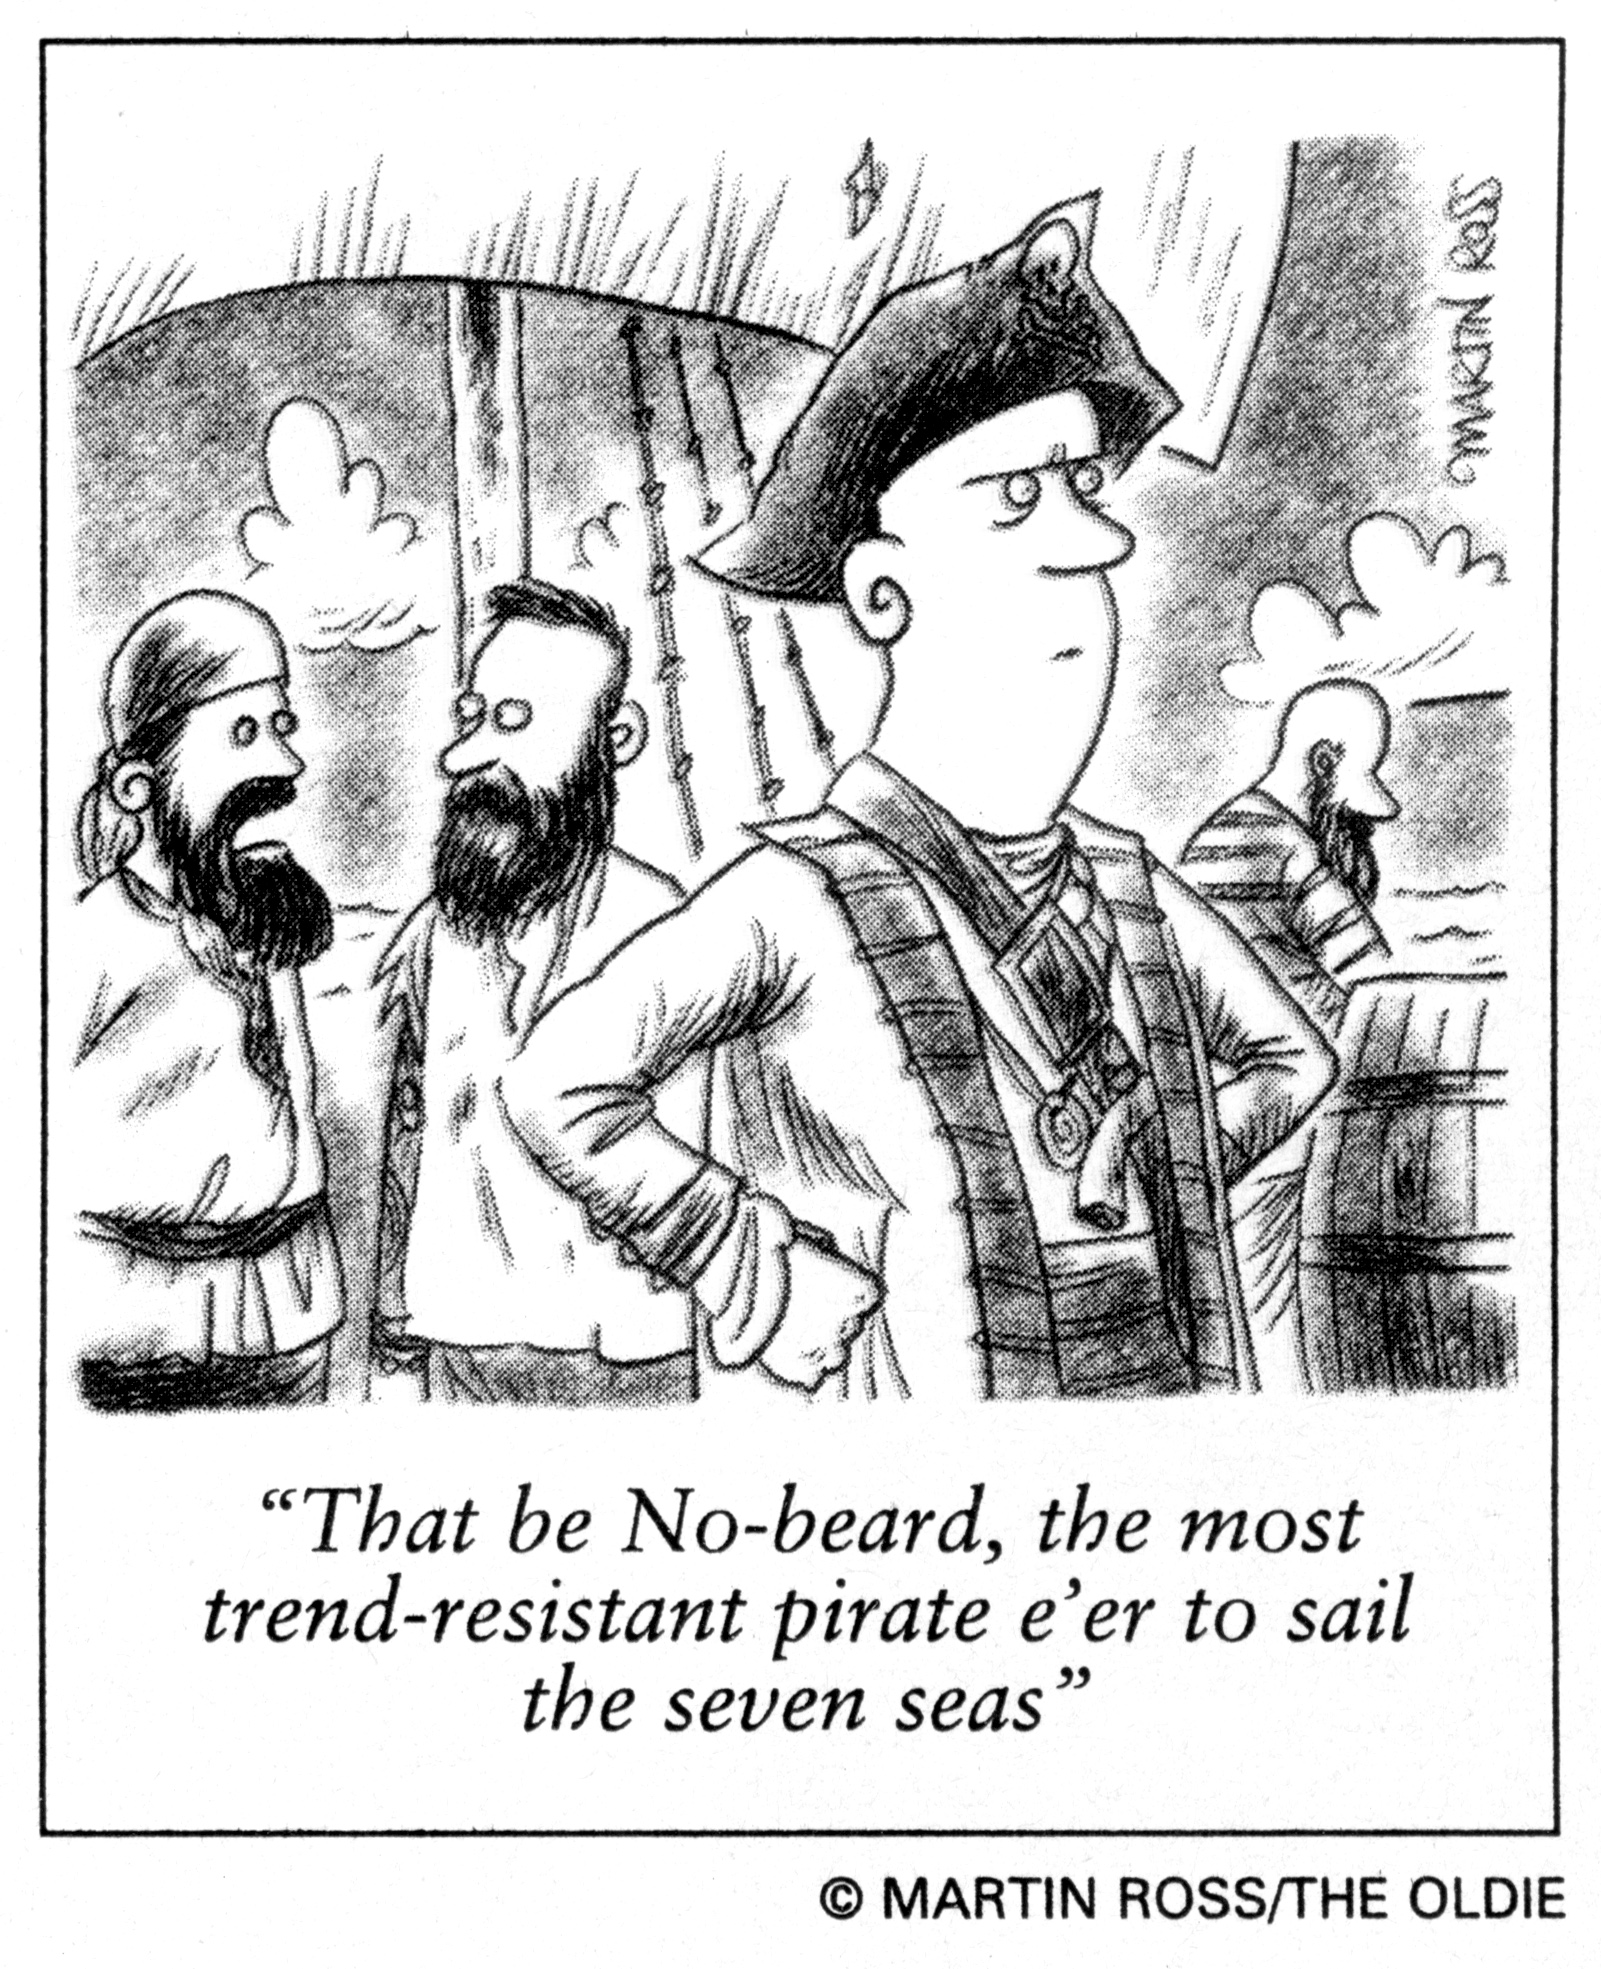 a cartoon showing two people, one with a pirate hat